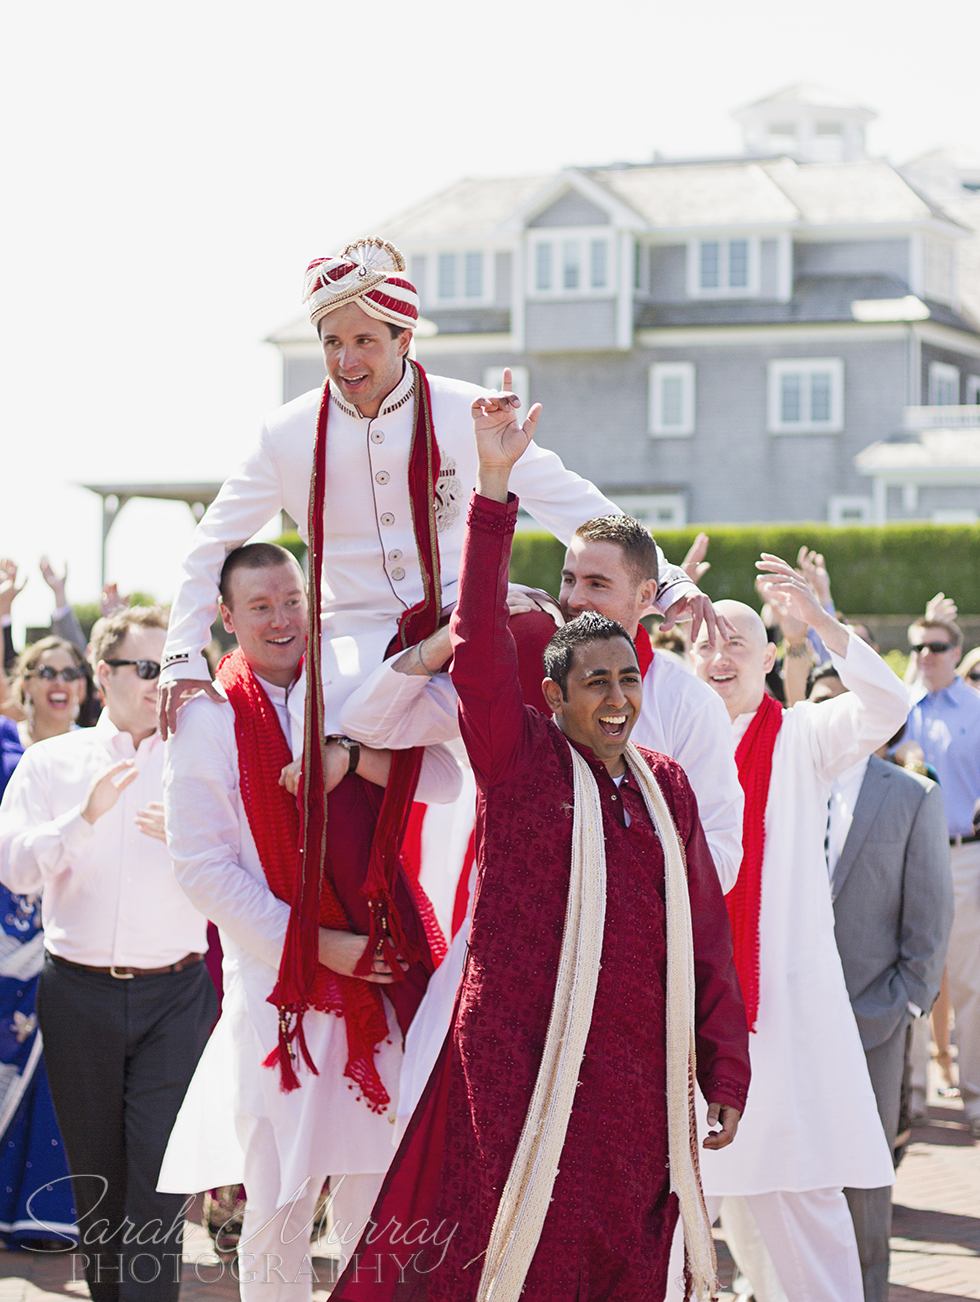 Wychmere Beach Club Indian Baraat Ceremony and Wedding in Harwichport, Cape Cod, Massachusetts - Sarah Murray Photography